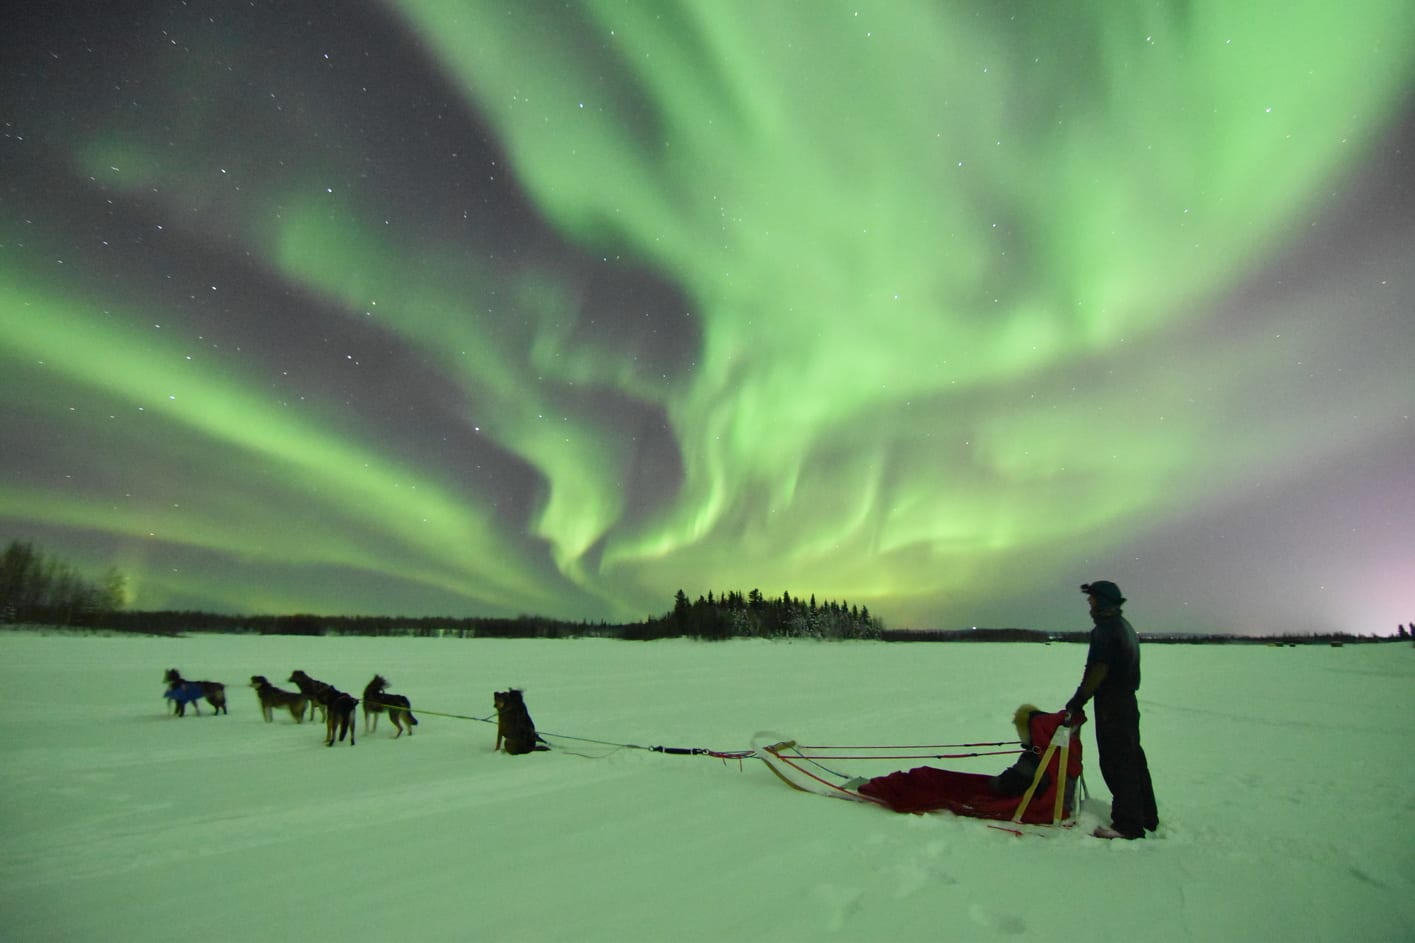 Aurora borealis tour in Fairbanks with dog sledding, a fun and unique way to see the Northern Lights in Fairbanks